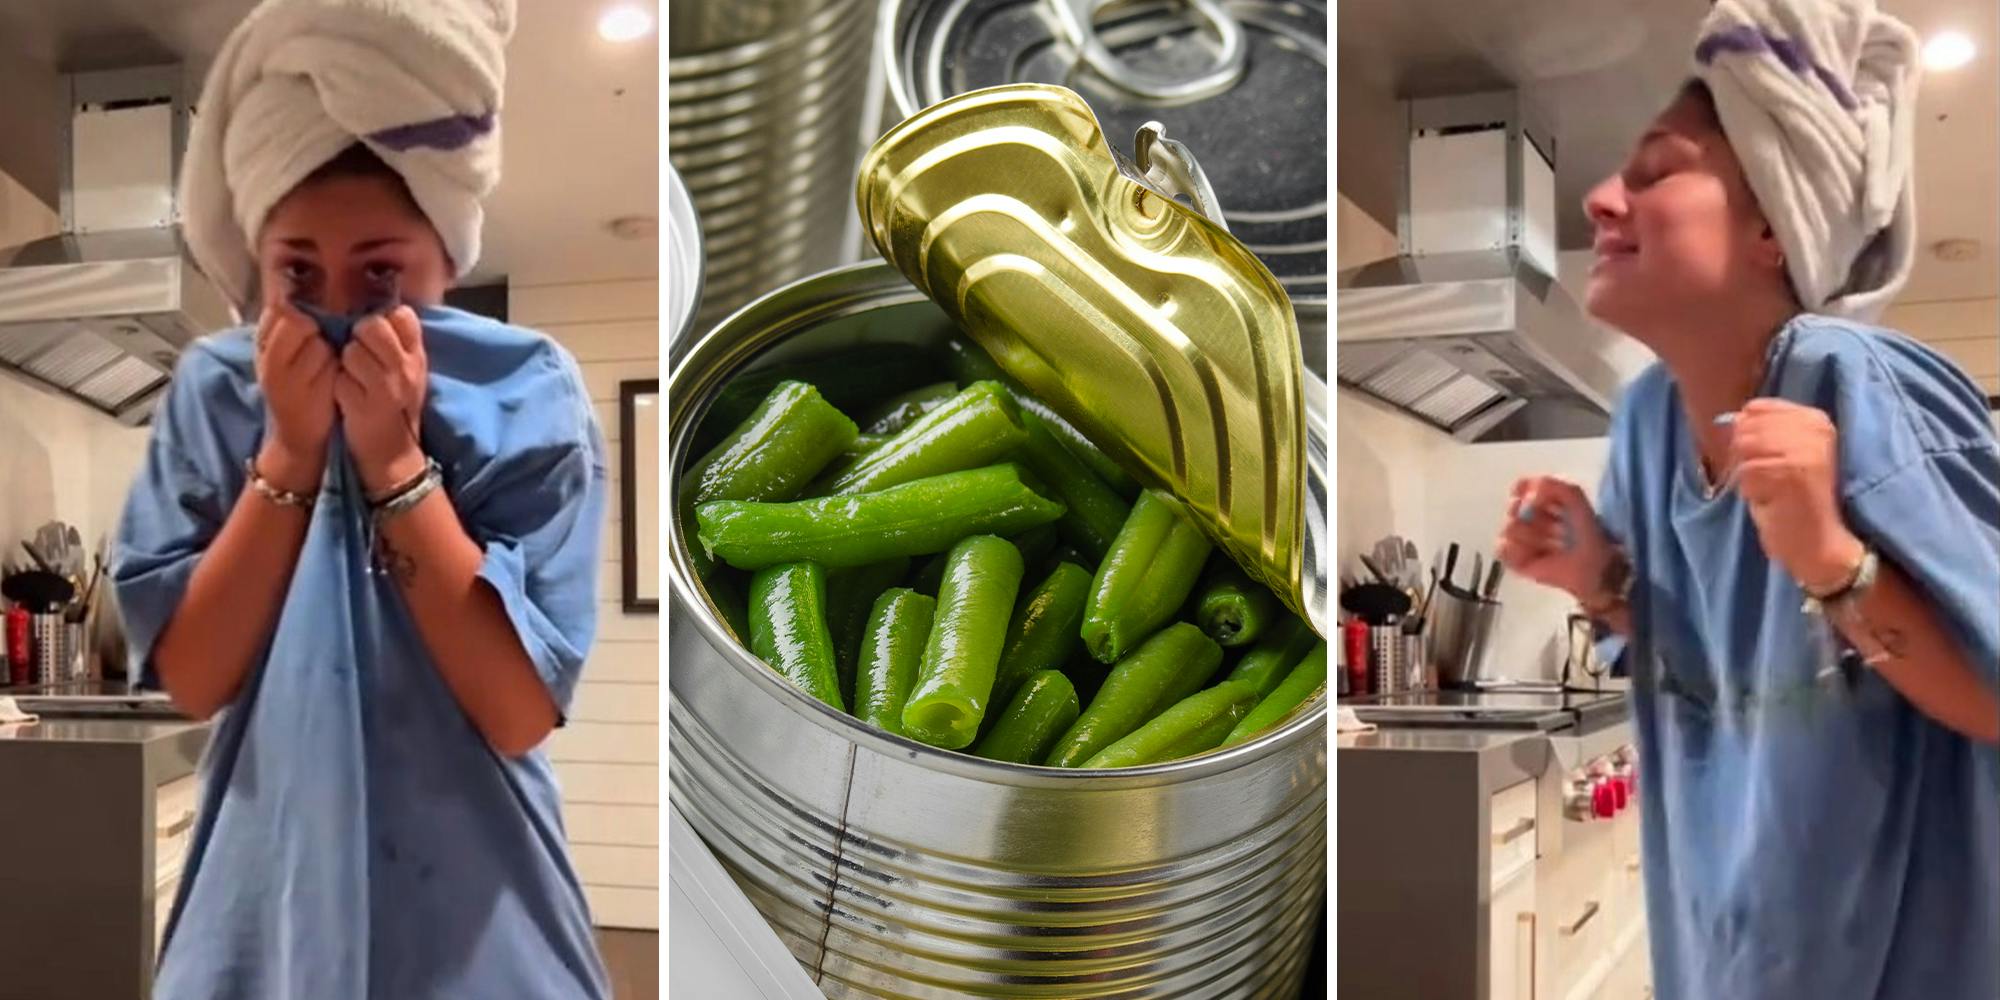 Woman finds something unusual in can of green beans